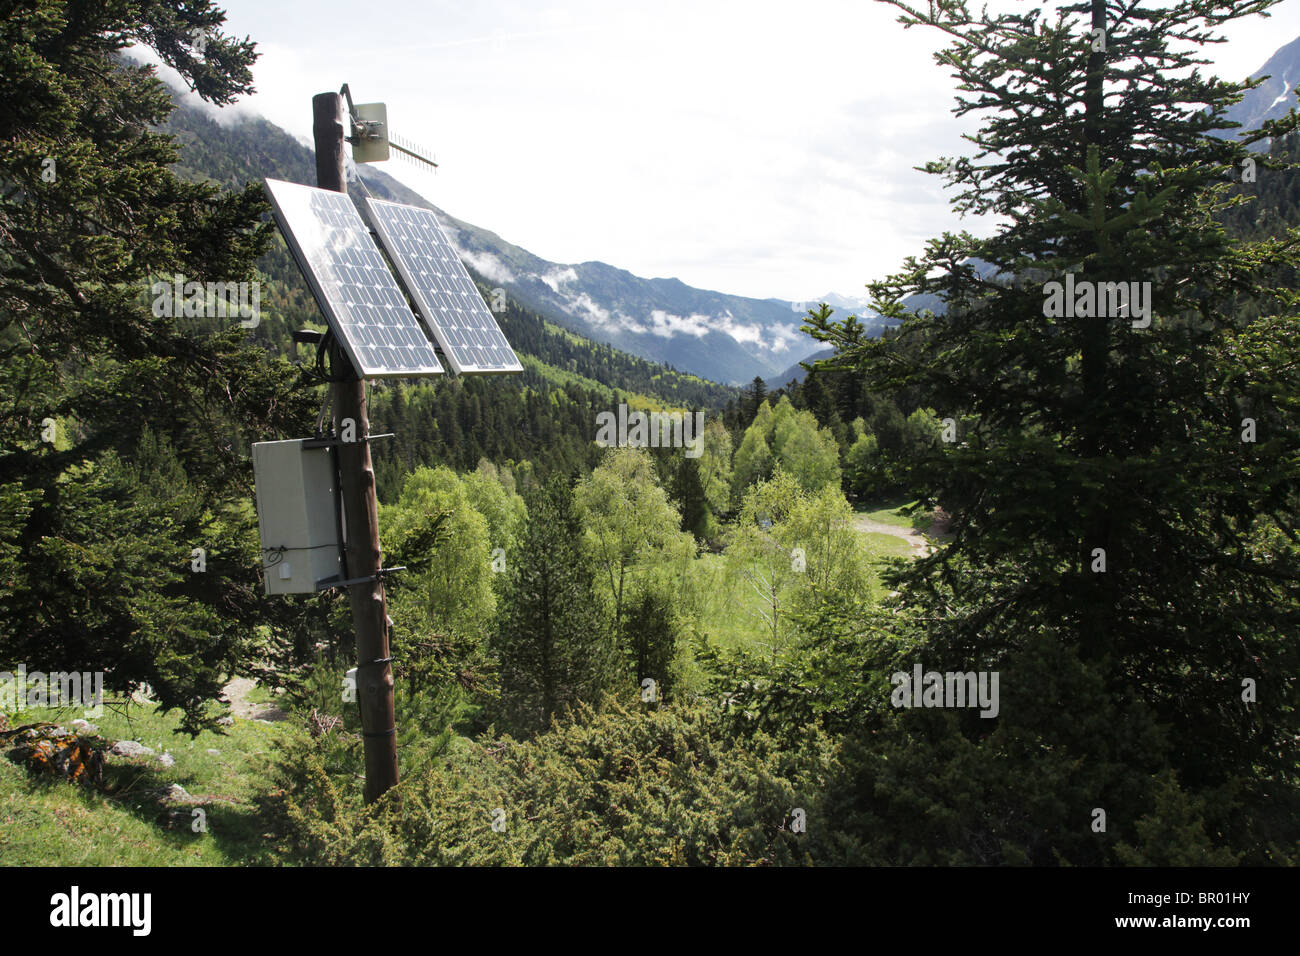 Solar panels at Refugi Sant Maurici around subalpine forest and mountains in the SM National Park Pyrenees Spain Stock Photo